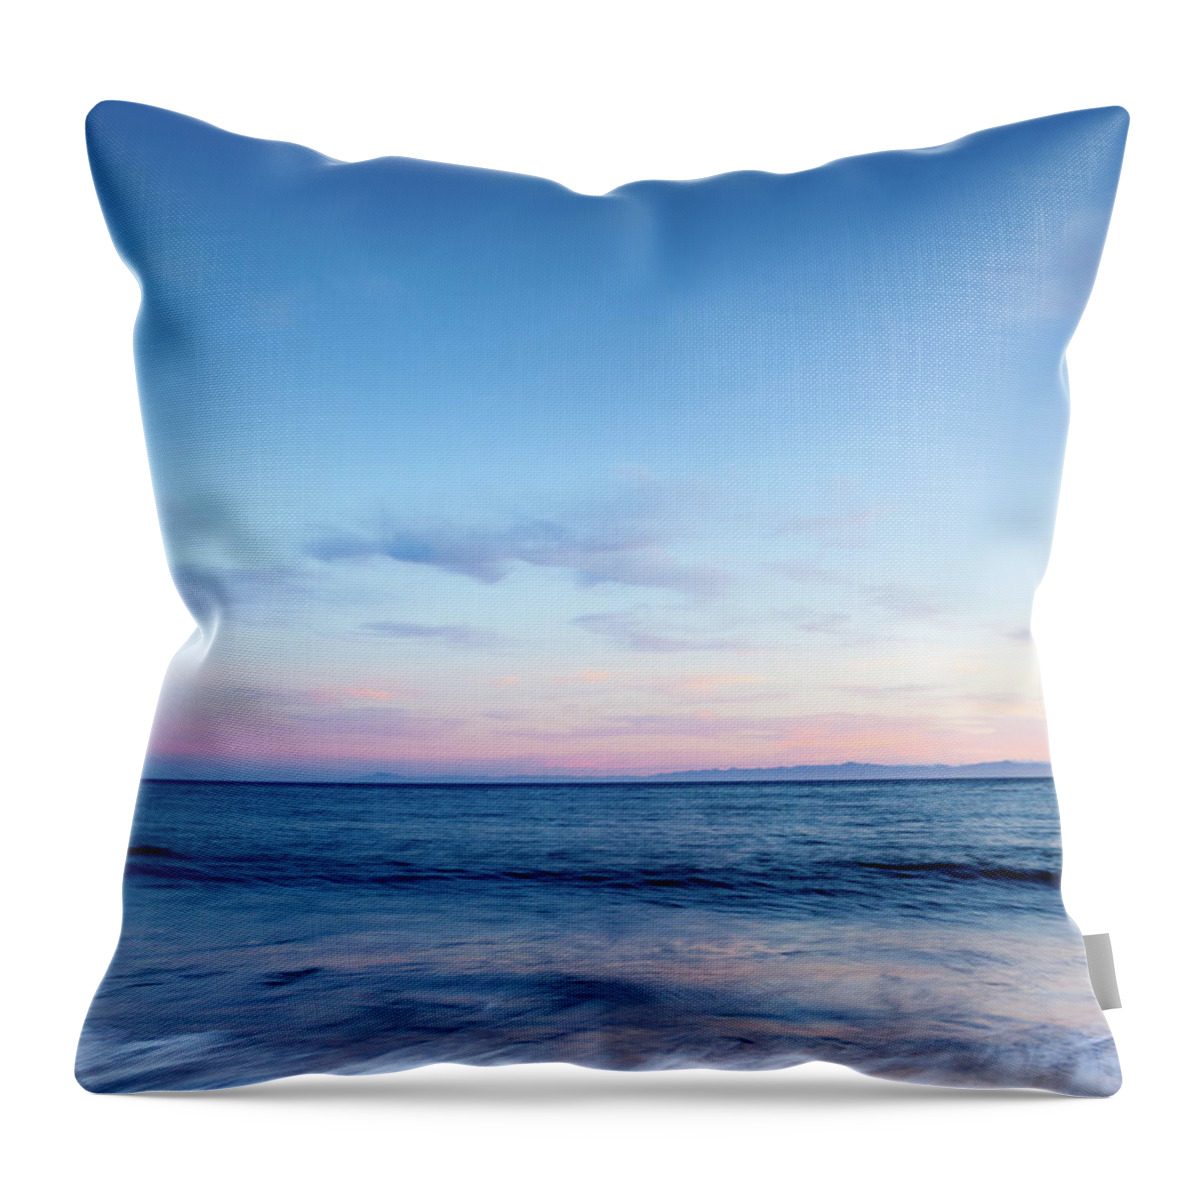 Water's Edge Throw Pillow featuring the photograph Pastel Sea by © Patrick Stanbro